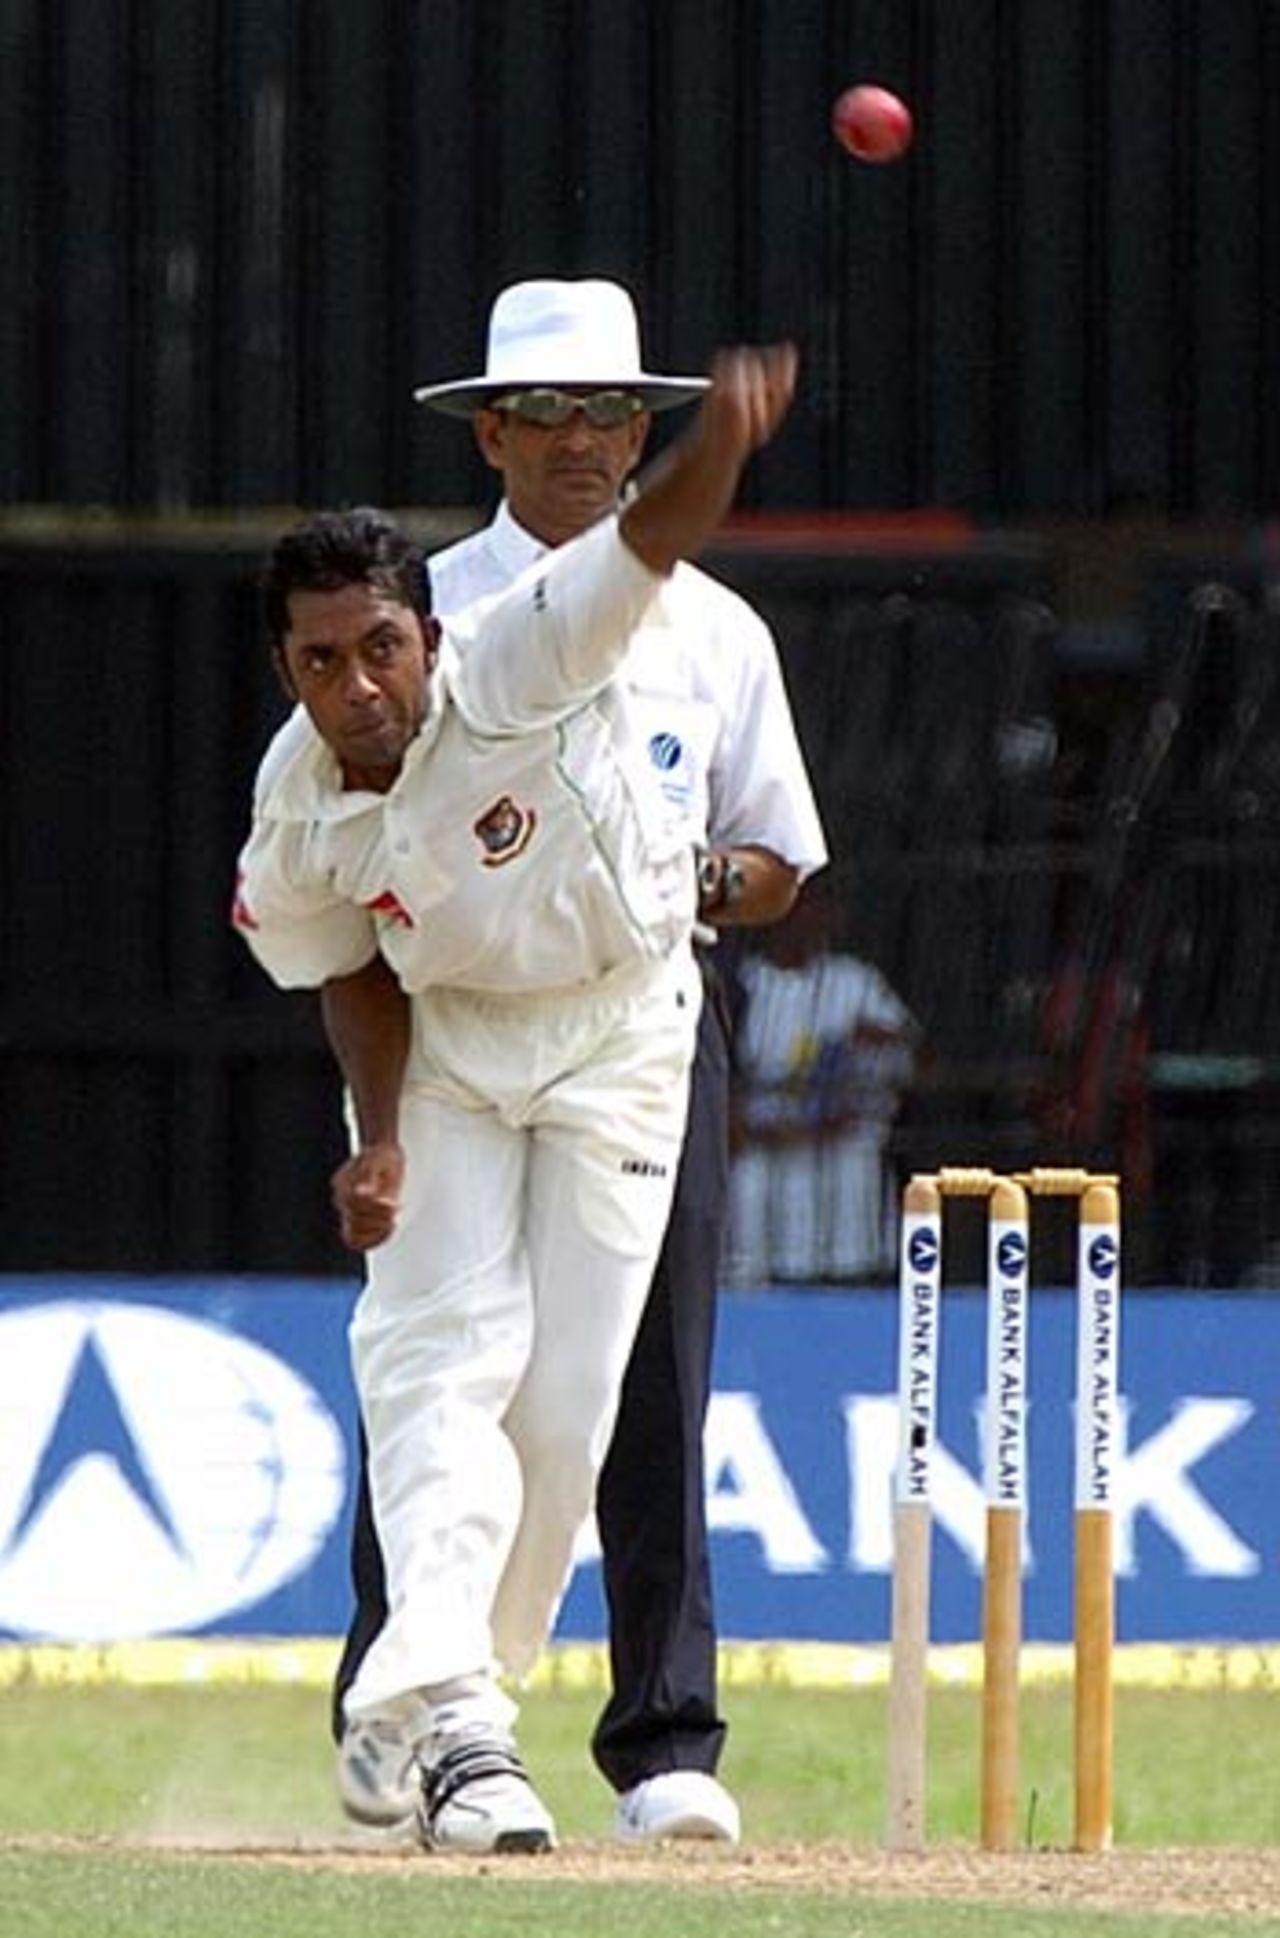 Syed Rasel sends down a delivery during his opening spell in which he picked up Marvan Atapattu's wicket, Sri Lanka v Bangladesh, R.Premadasa Stadium, Khettarama, Colombo, September 12, 2005